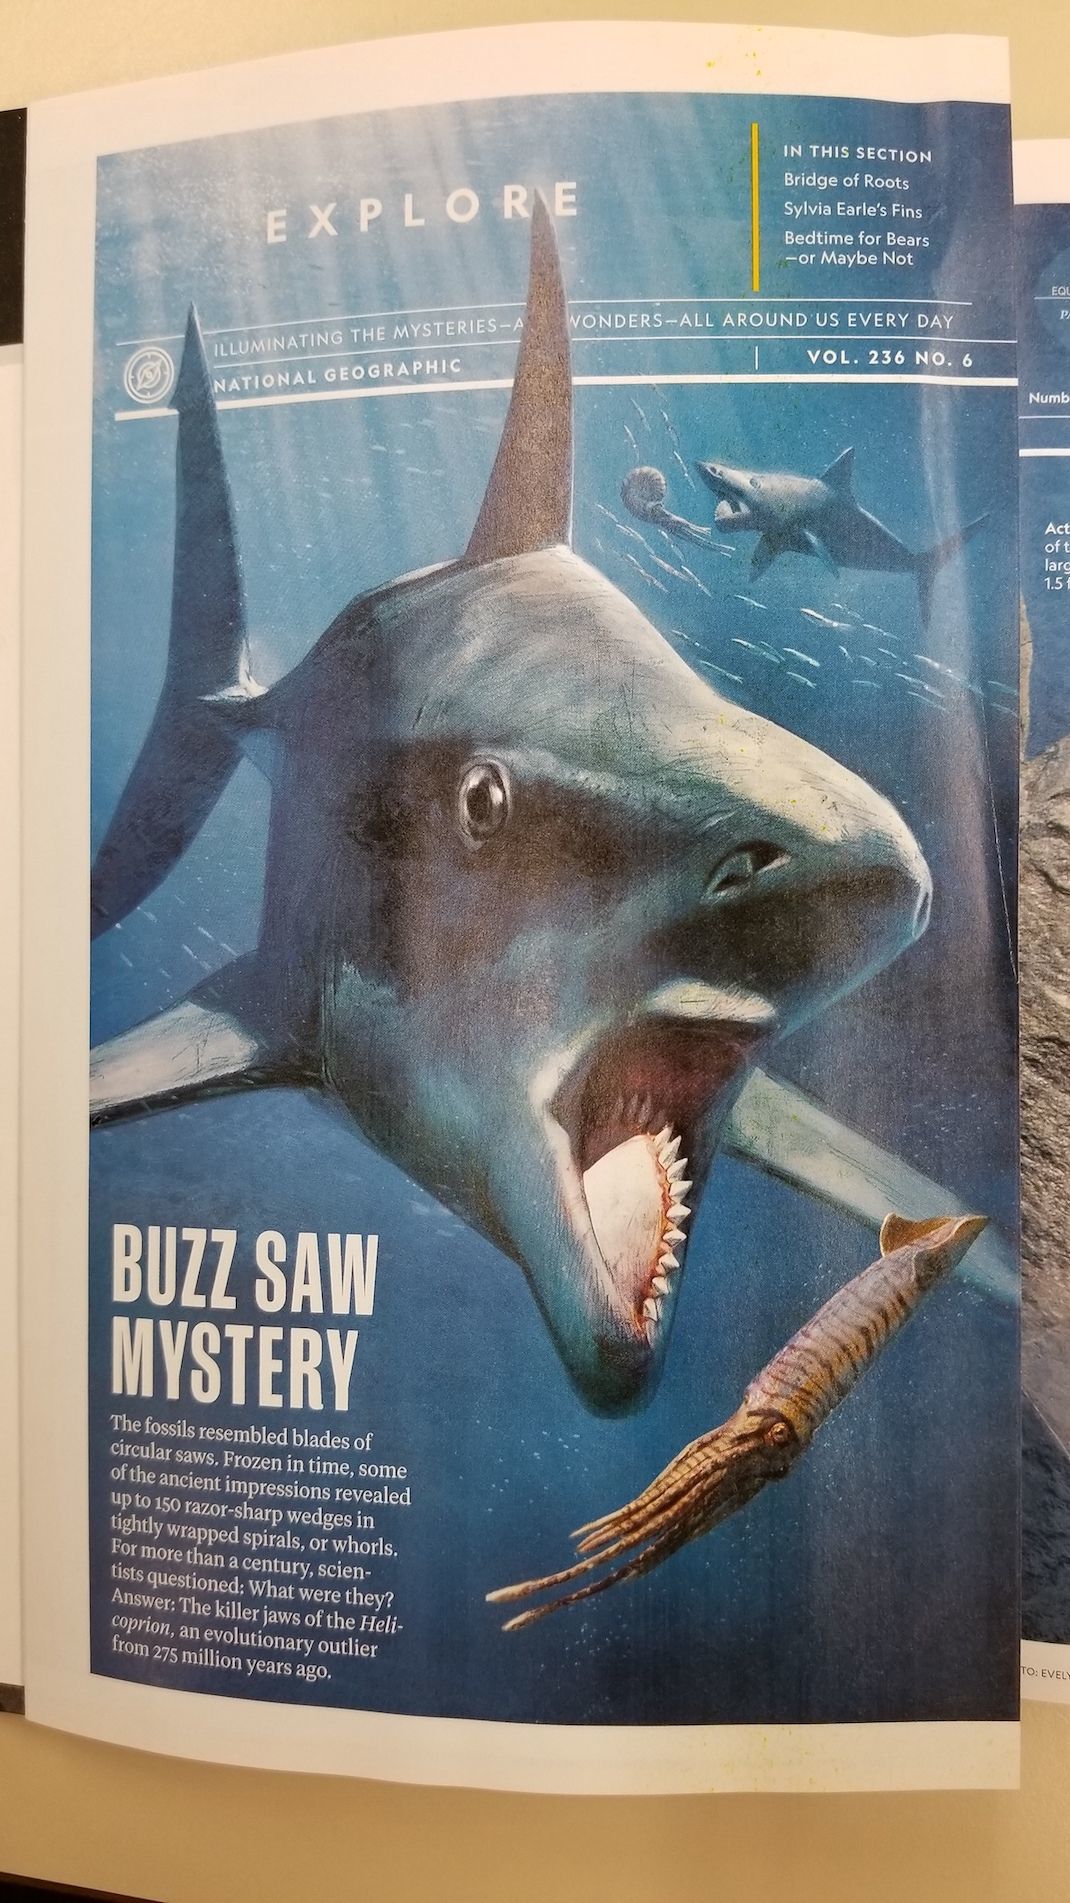 Idaho Museum Of Natural History S Buzzsaw Sharks Featured In December National Geographic Magazine Community Idahostatejournal Com